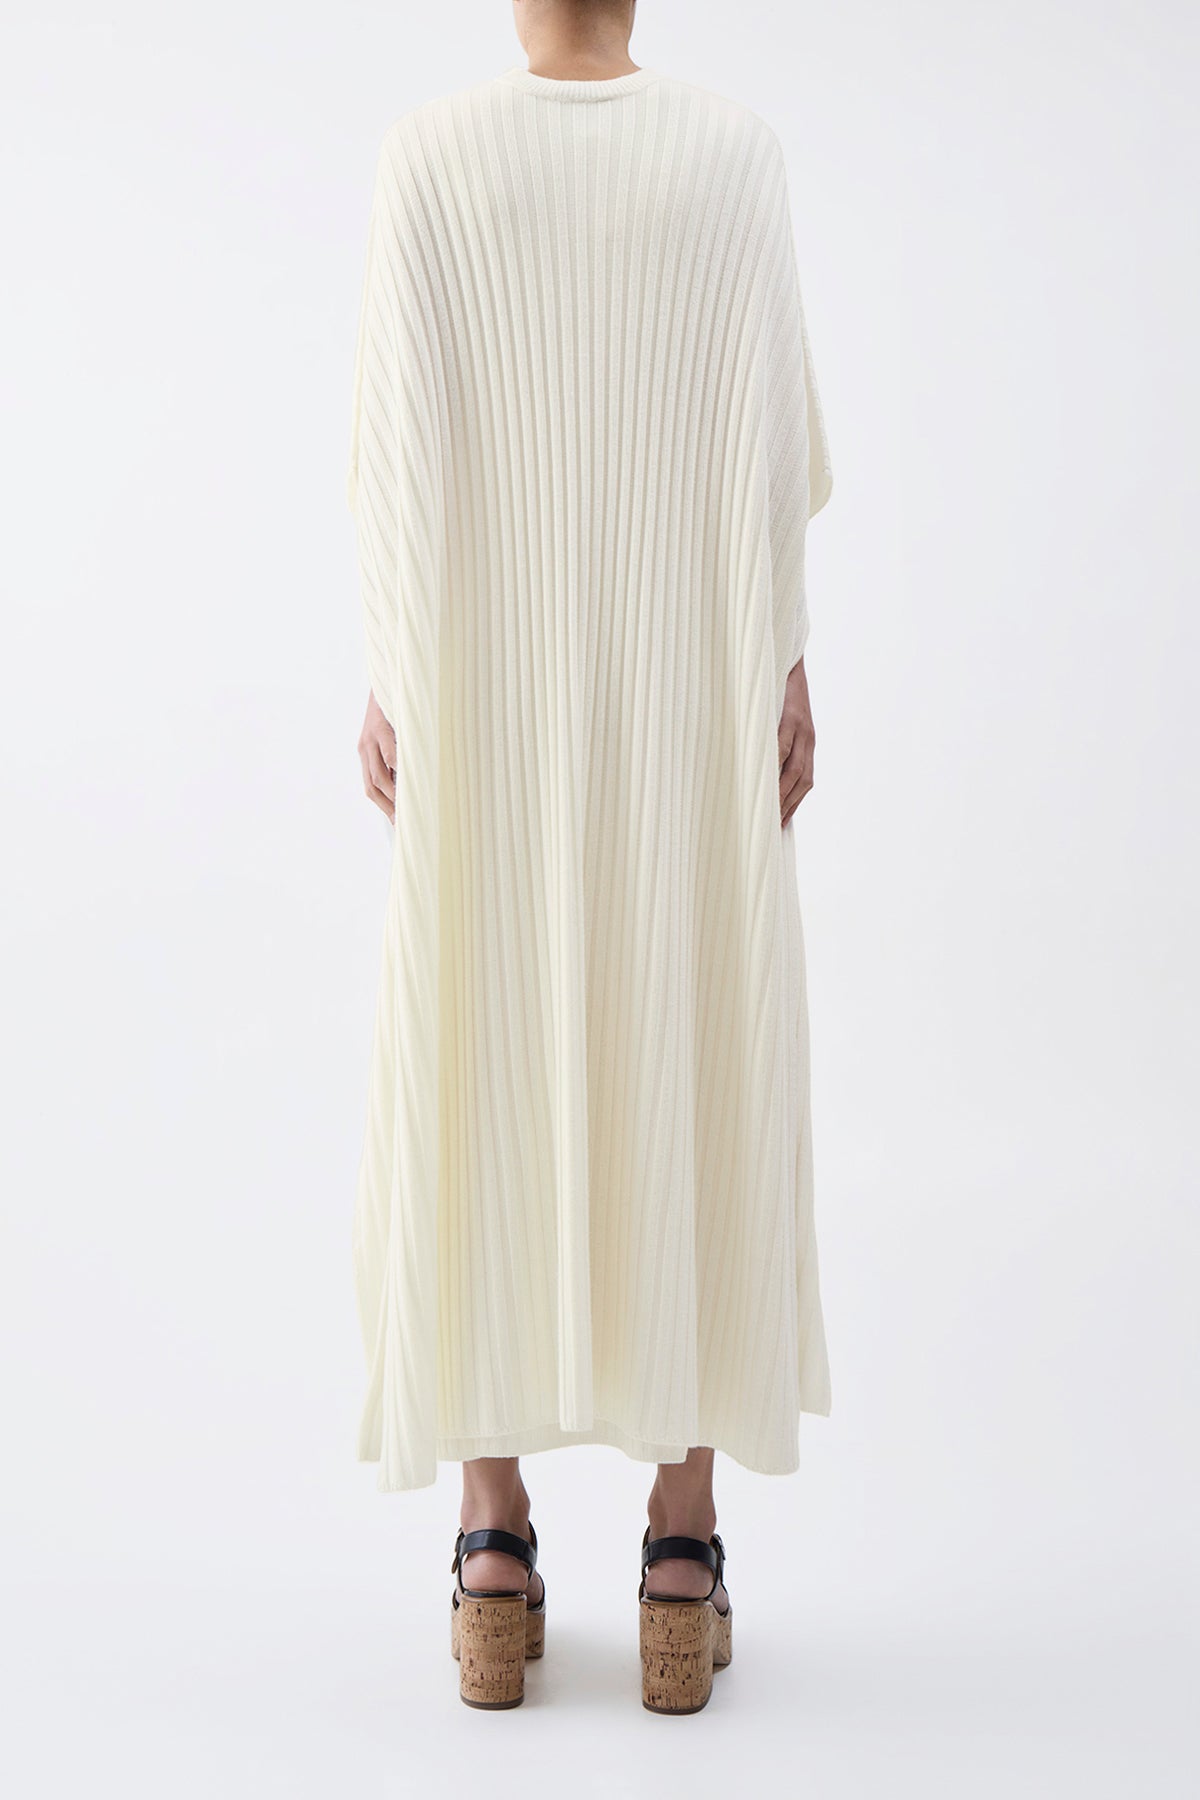 Taos Knit Poncho in Ivory Merino Wool Cashmere